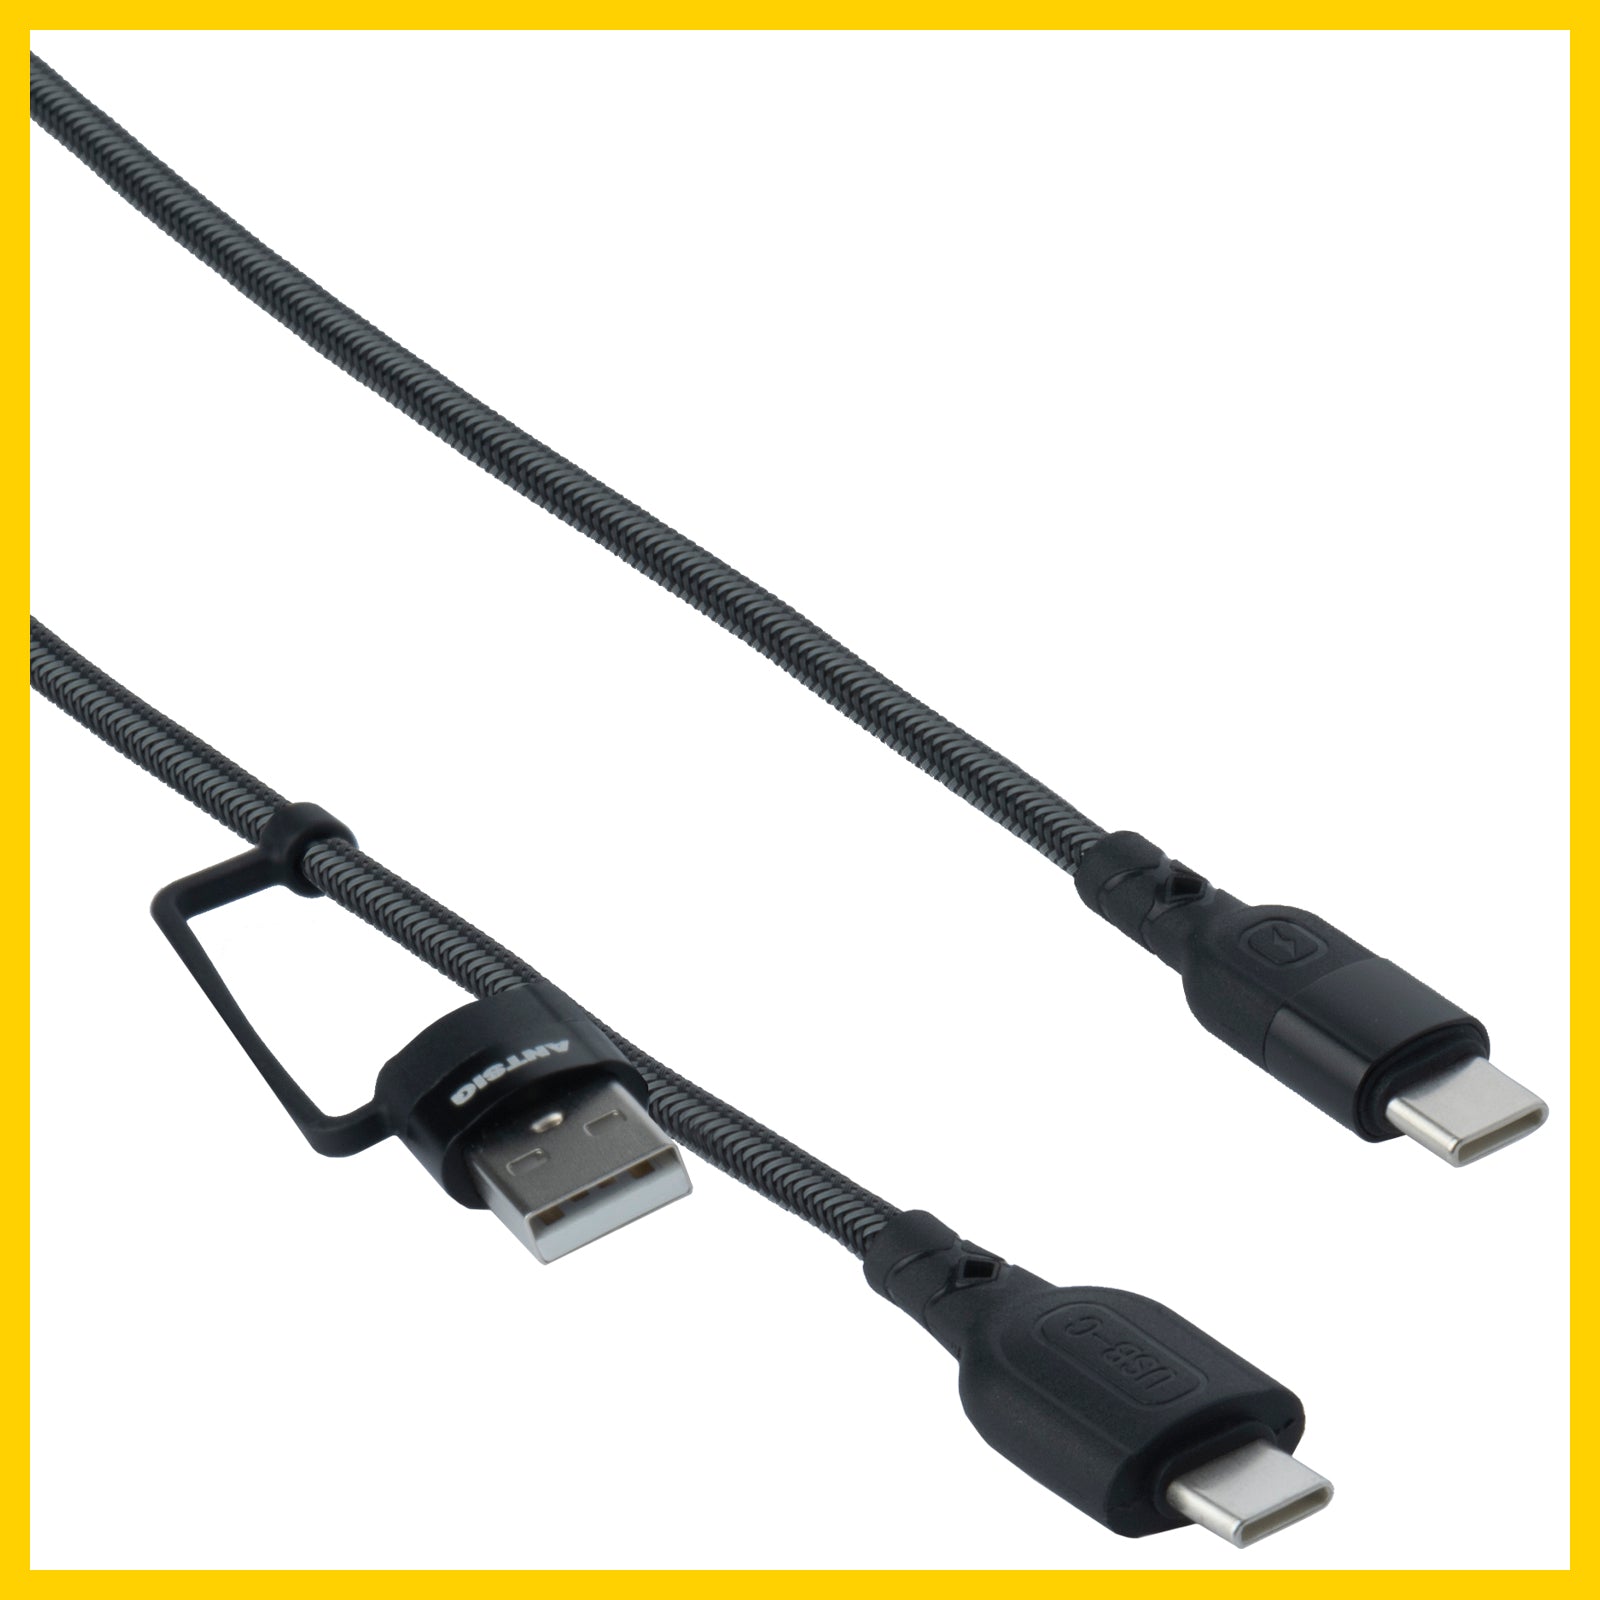 1.5m USB-C to USB-C/USB-A Adaptor Cable